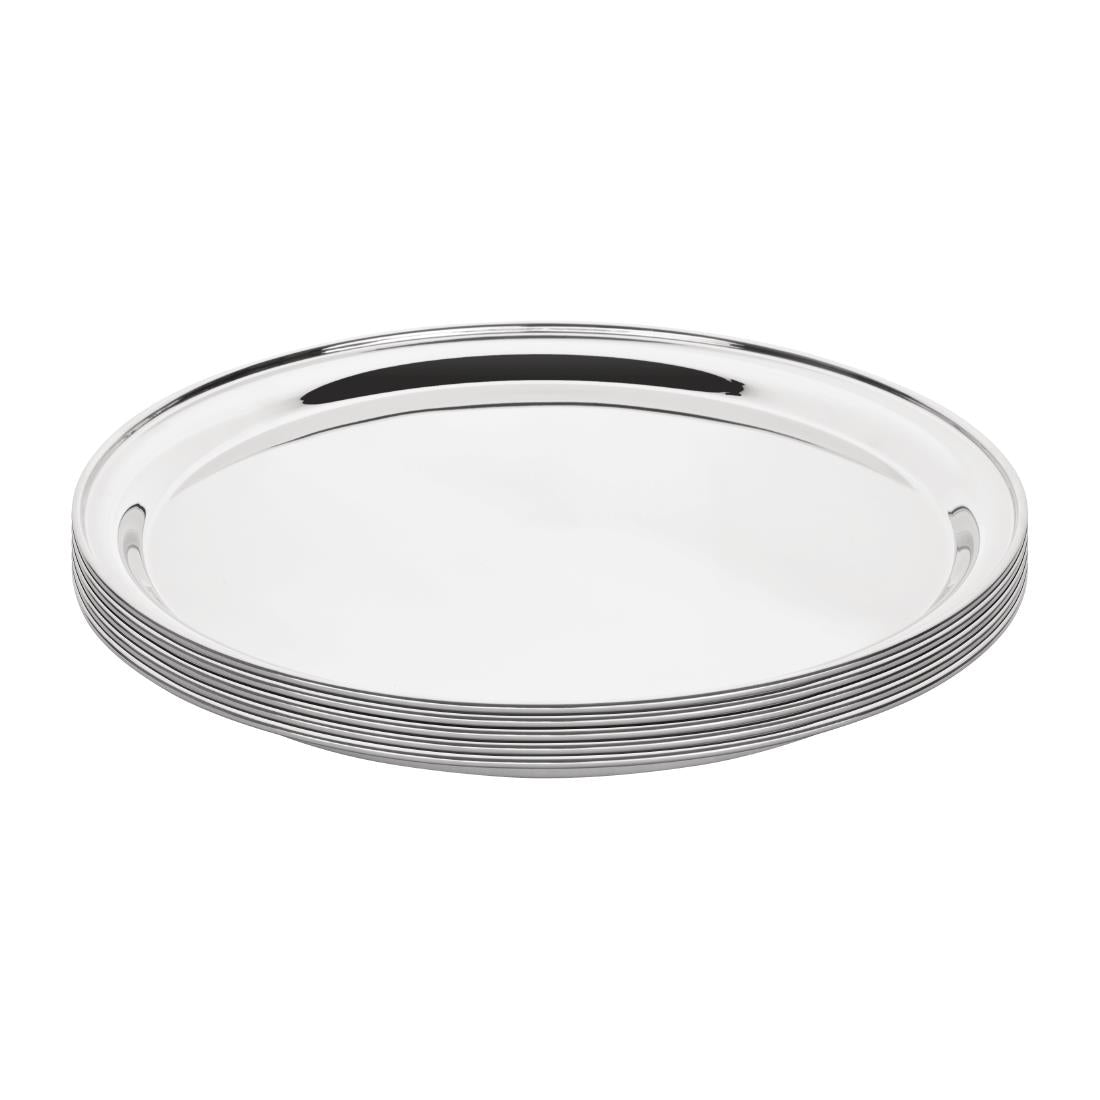 Olympia Stainless Steel Round Service Tray 305mm